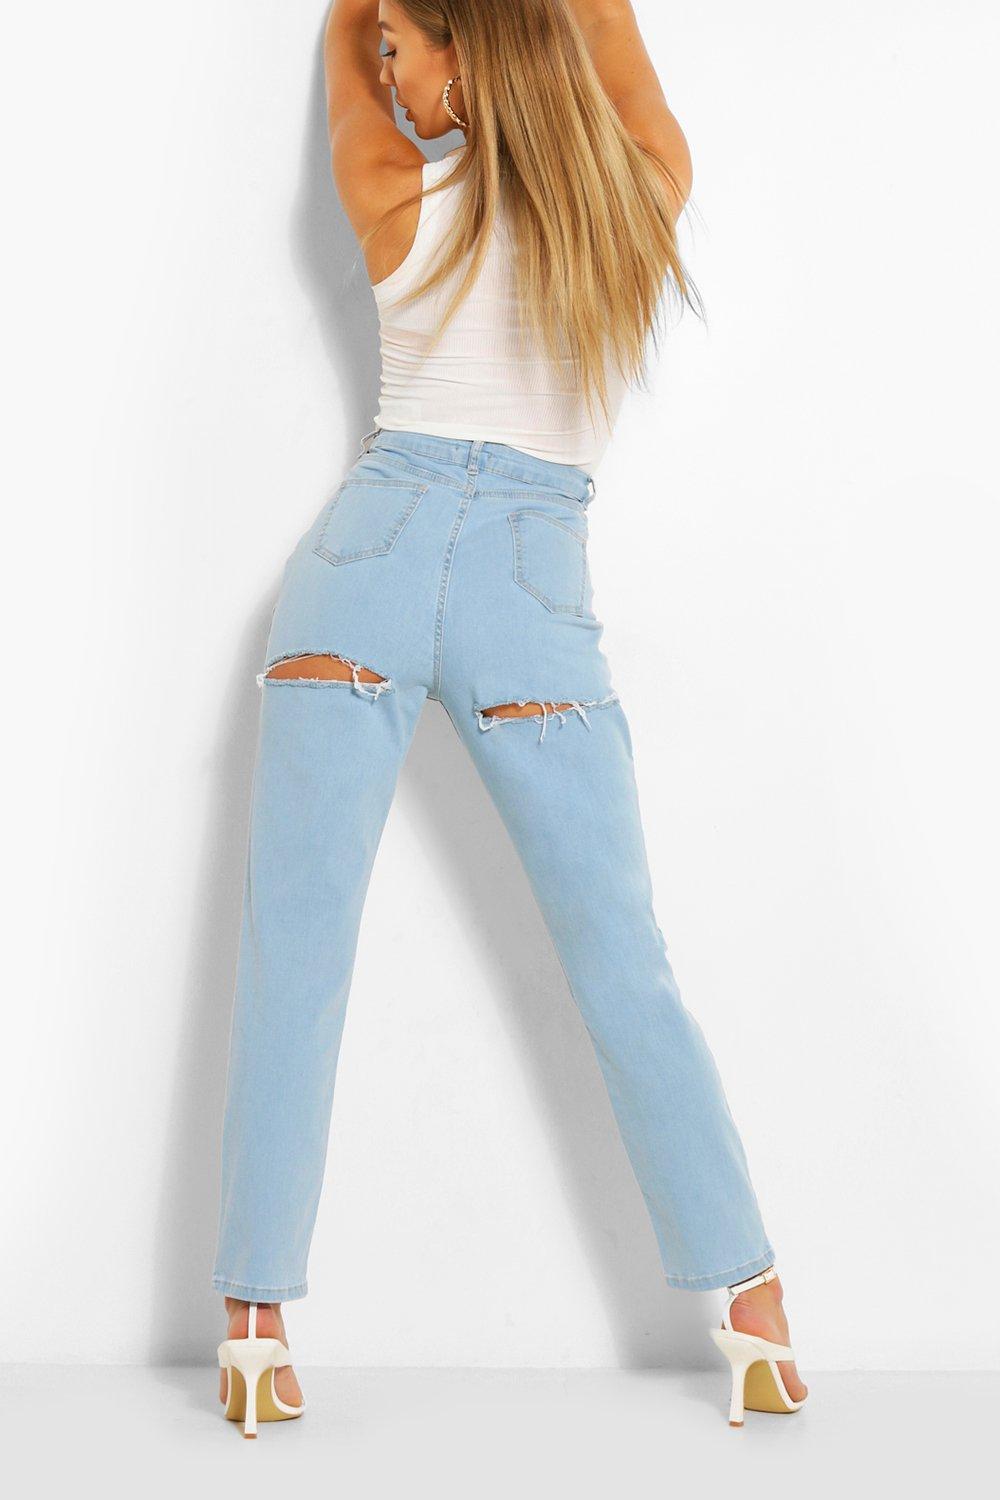 jeans with rips in the back